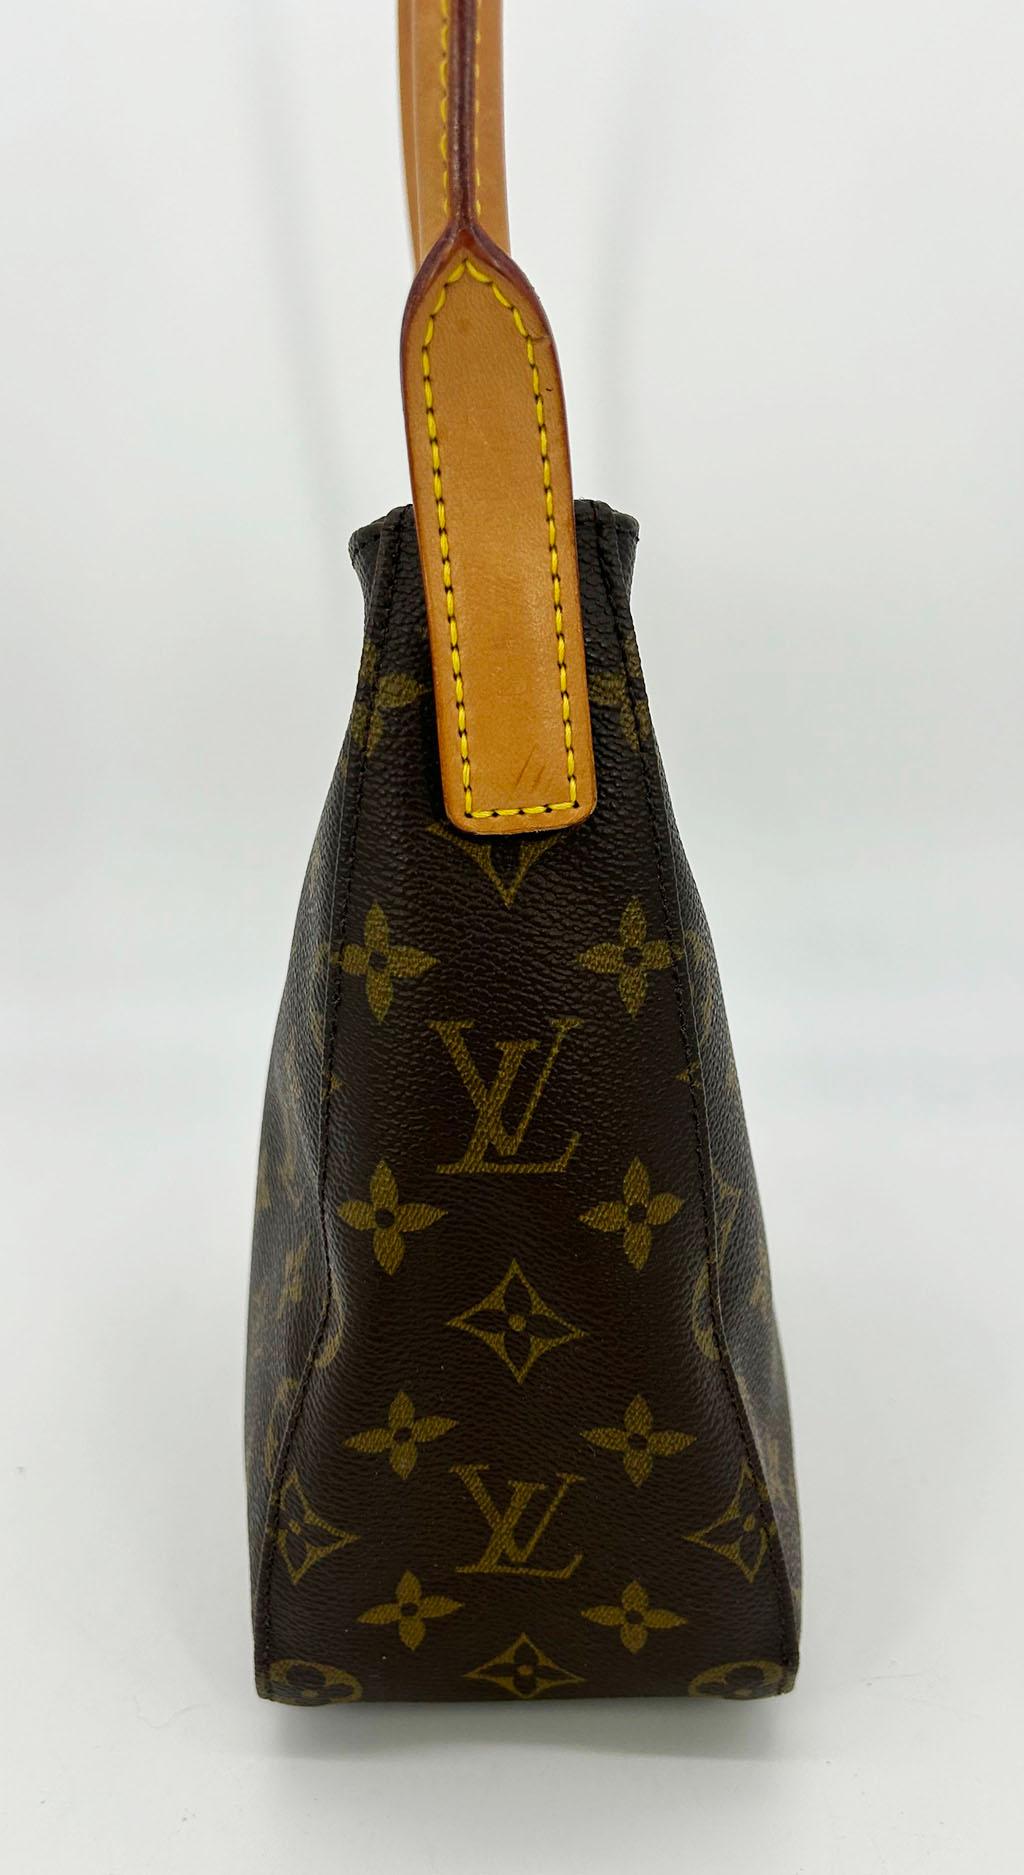 Louis Vuitton Monogram Canvas Looping MM in very good condition. Signature brown monogram canvas body with tan leather top handle and gold harrdware. Handle can fold up and down to wear or carry this piece in a variety of ways. Full top full zip